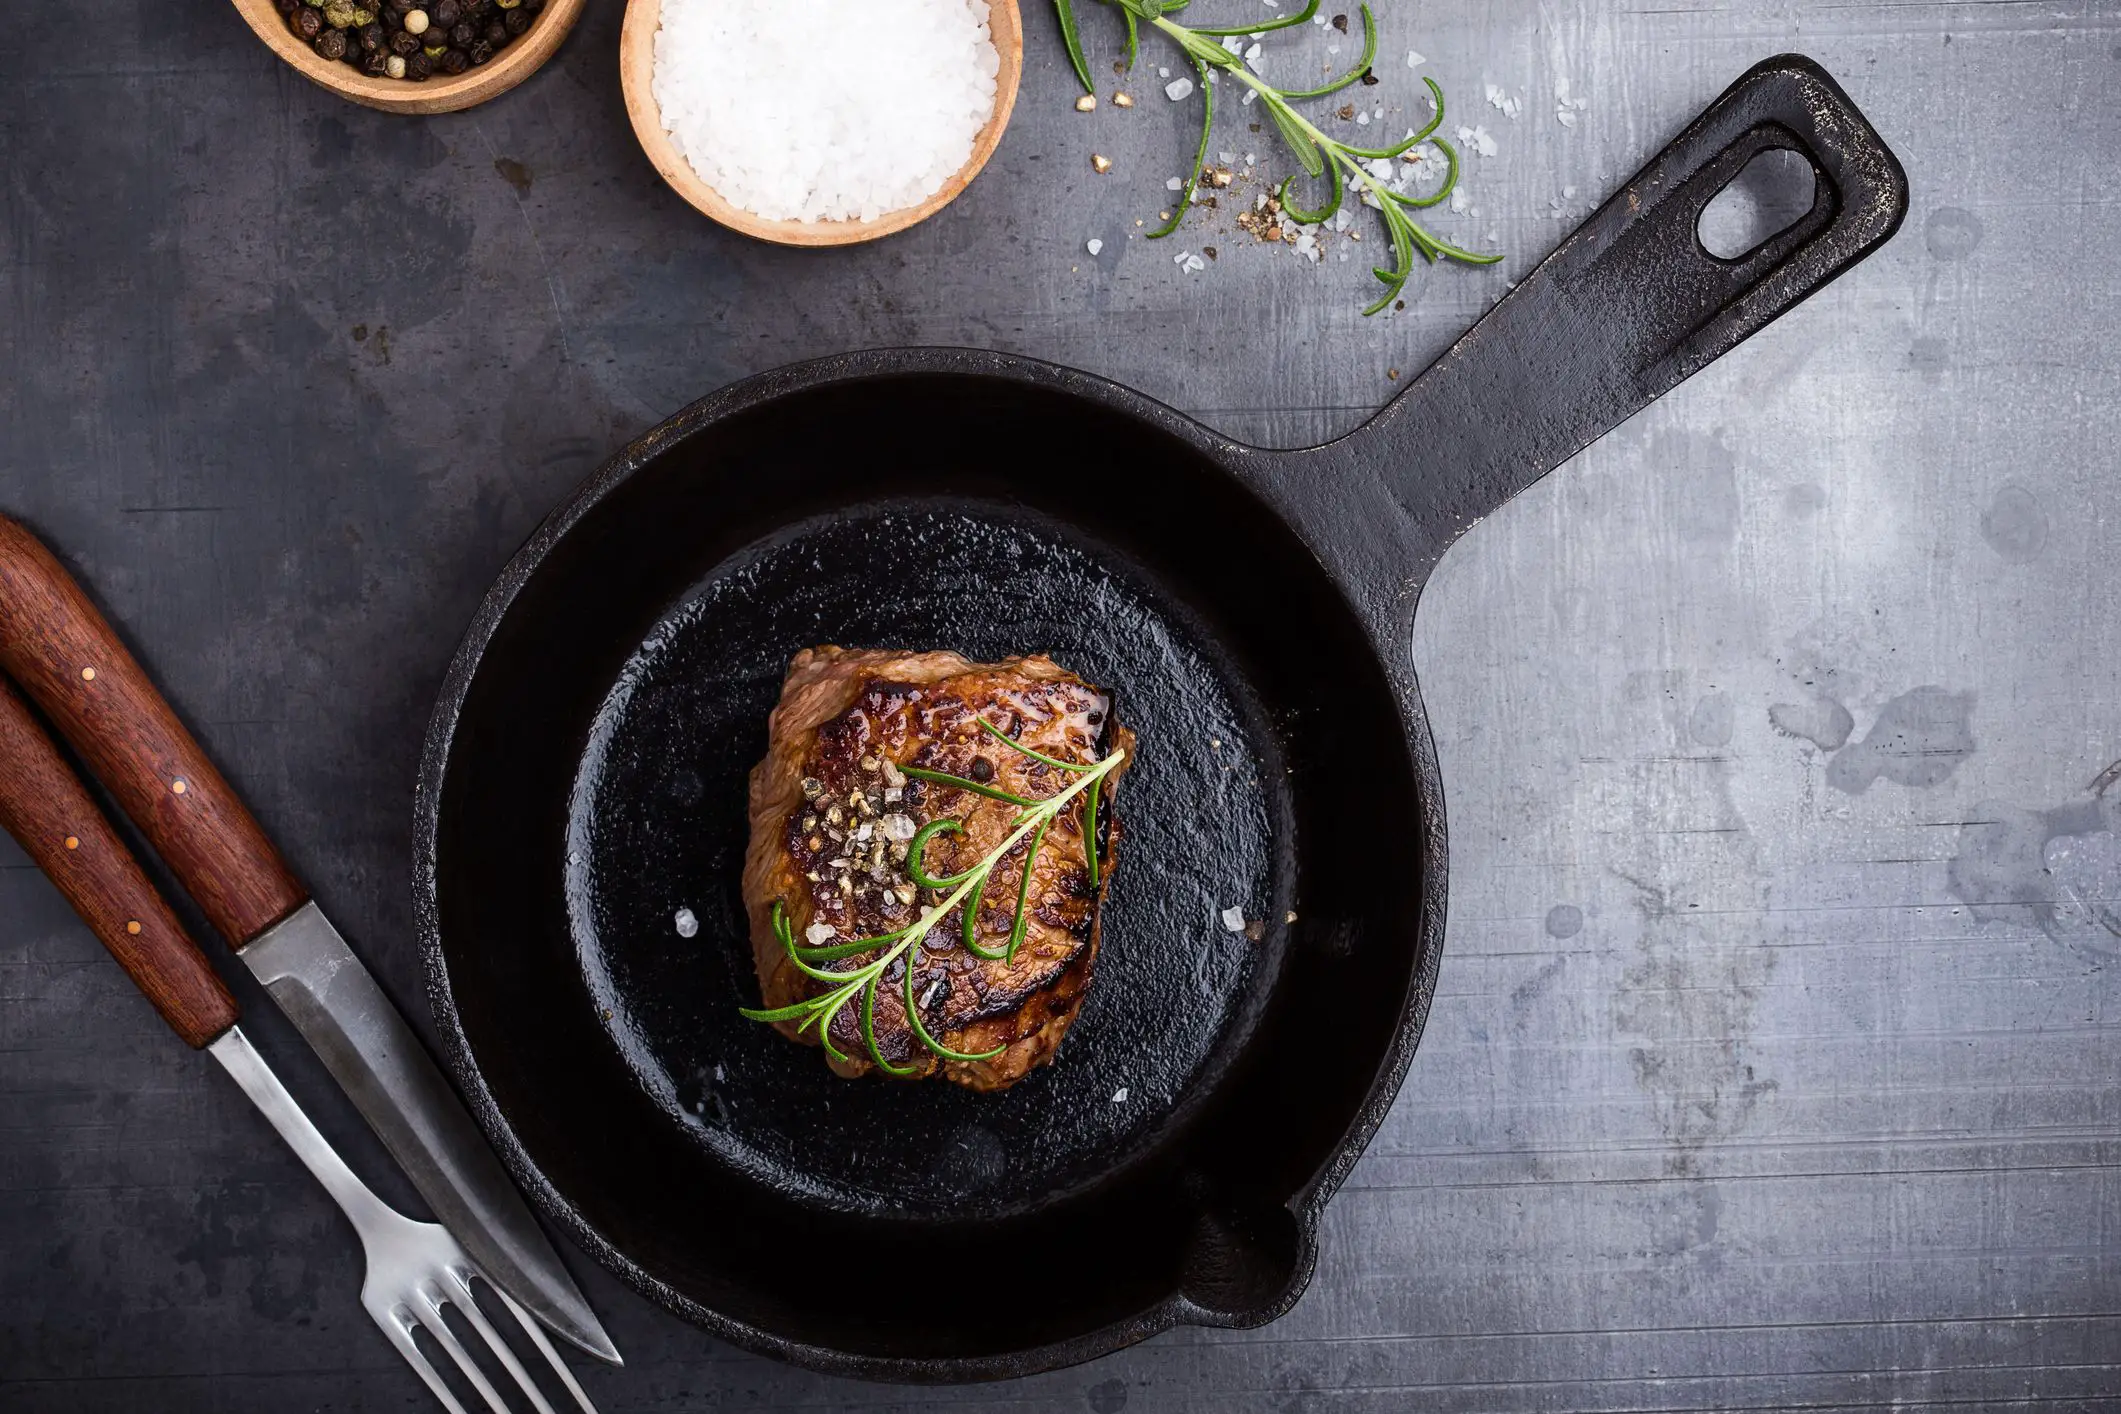 Cast Iron Pan: 5 Interesting Facts You Didn’t Know!